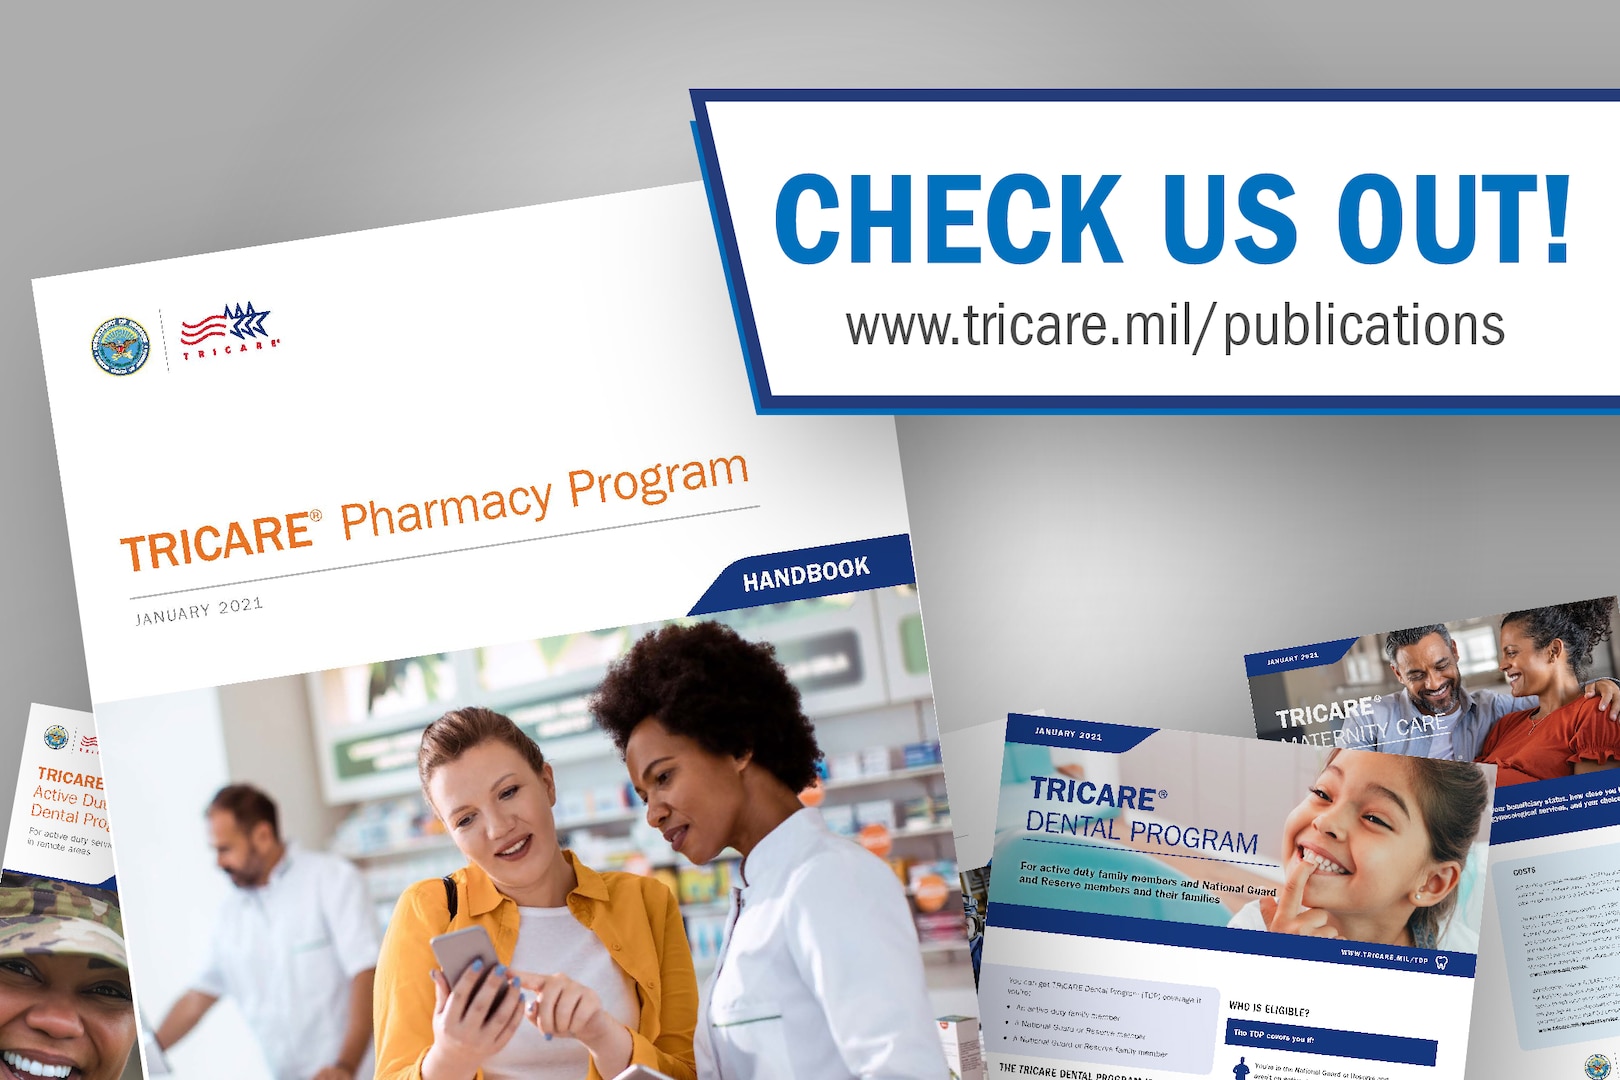 Pharmacy Benefit Questions? Check Out This Handbook > TRICARE Newsroom